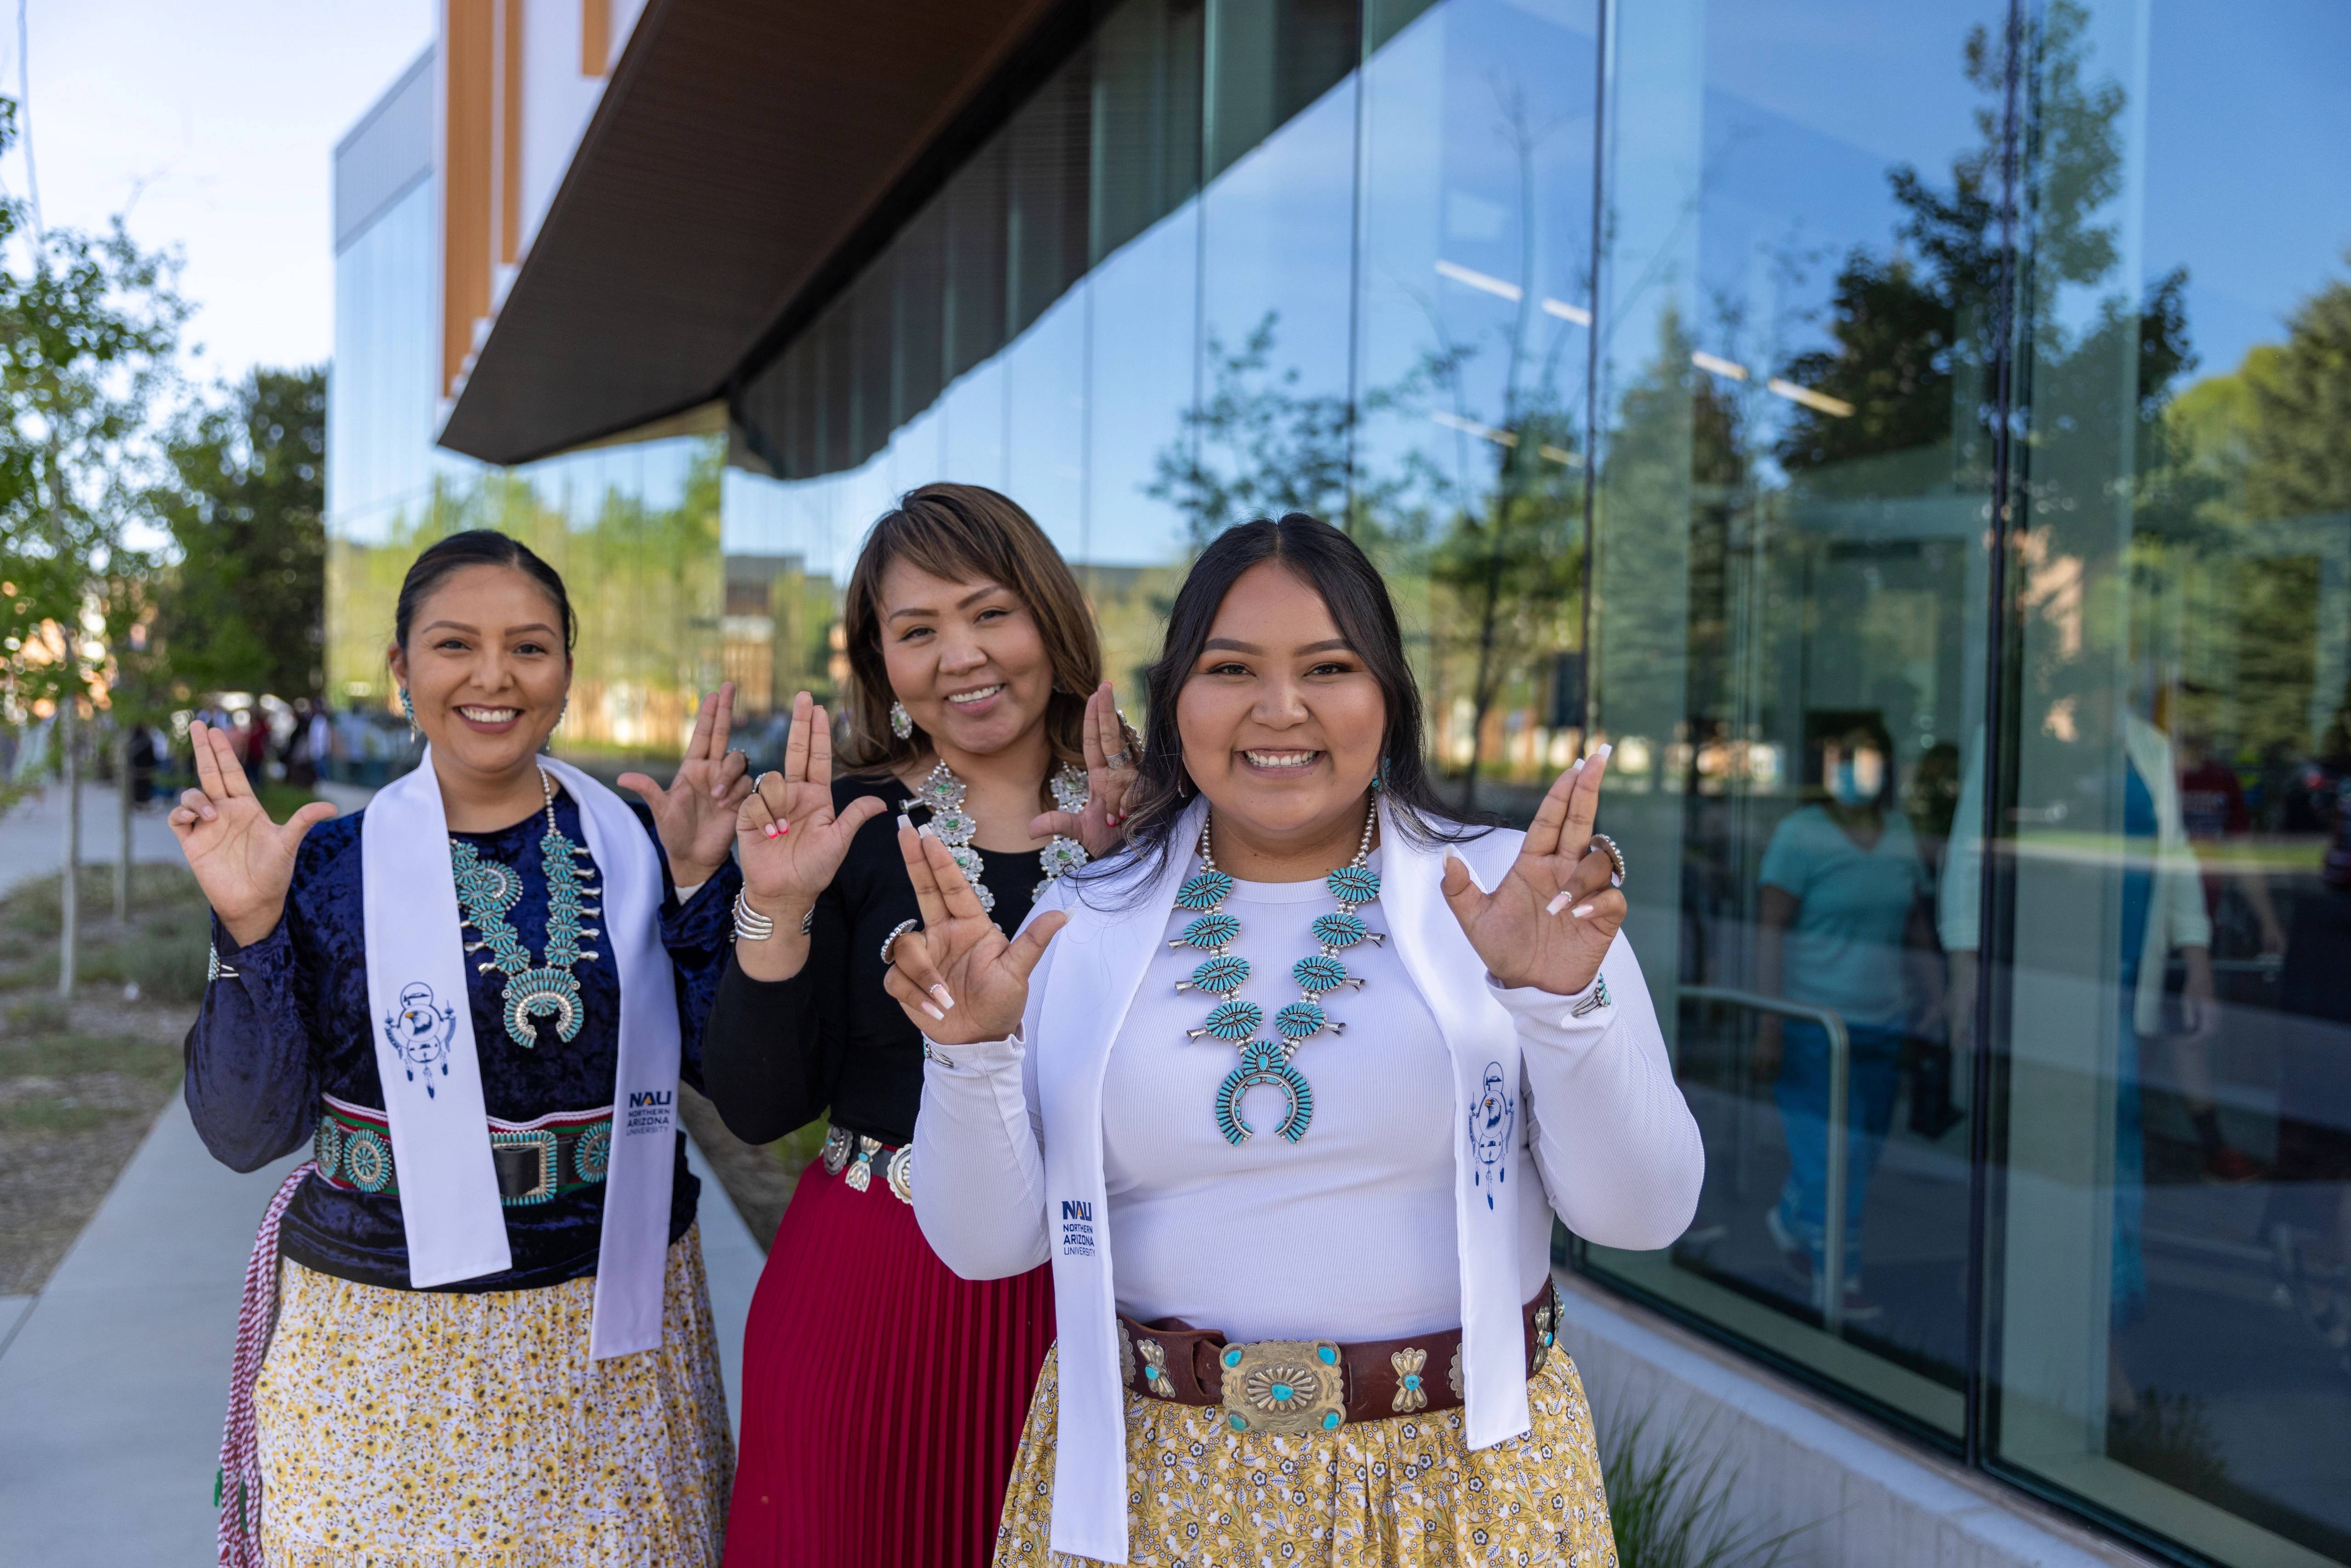 Indigenous students smiling and posing during the Indigenous convocation reception